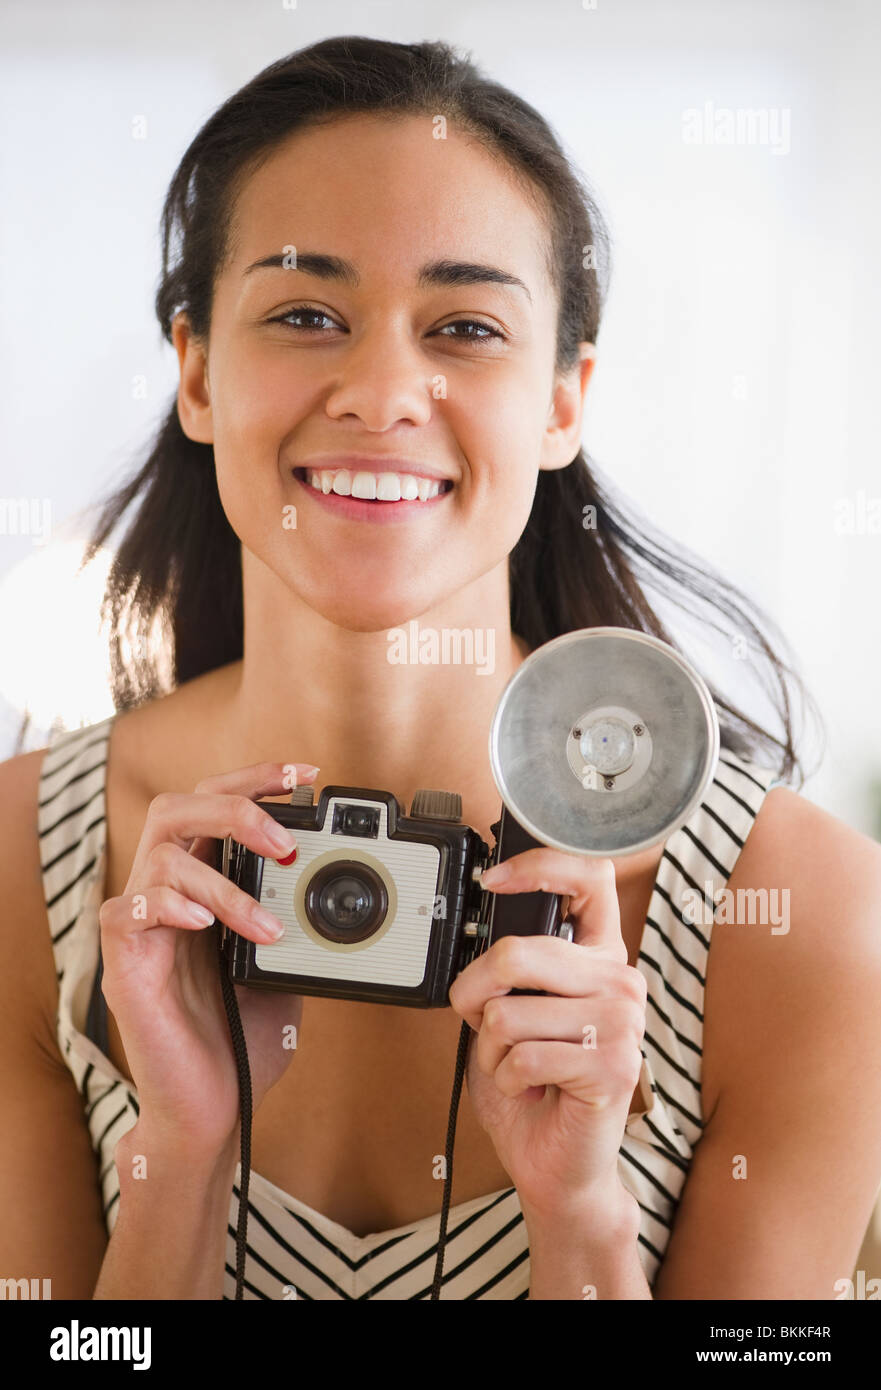 Mixed race woman holding old-fashioned camera Stock Photo